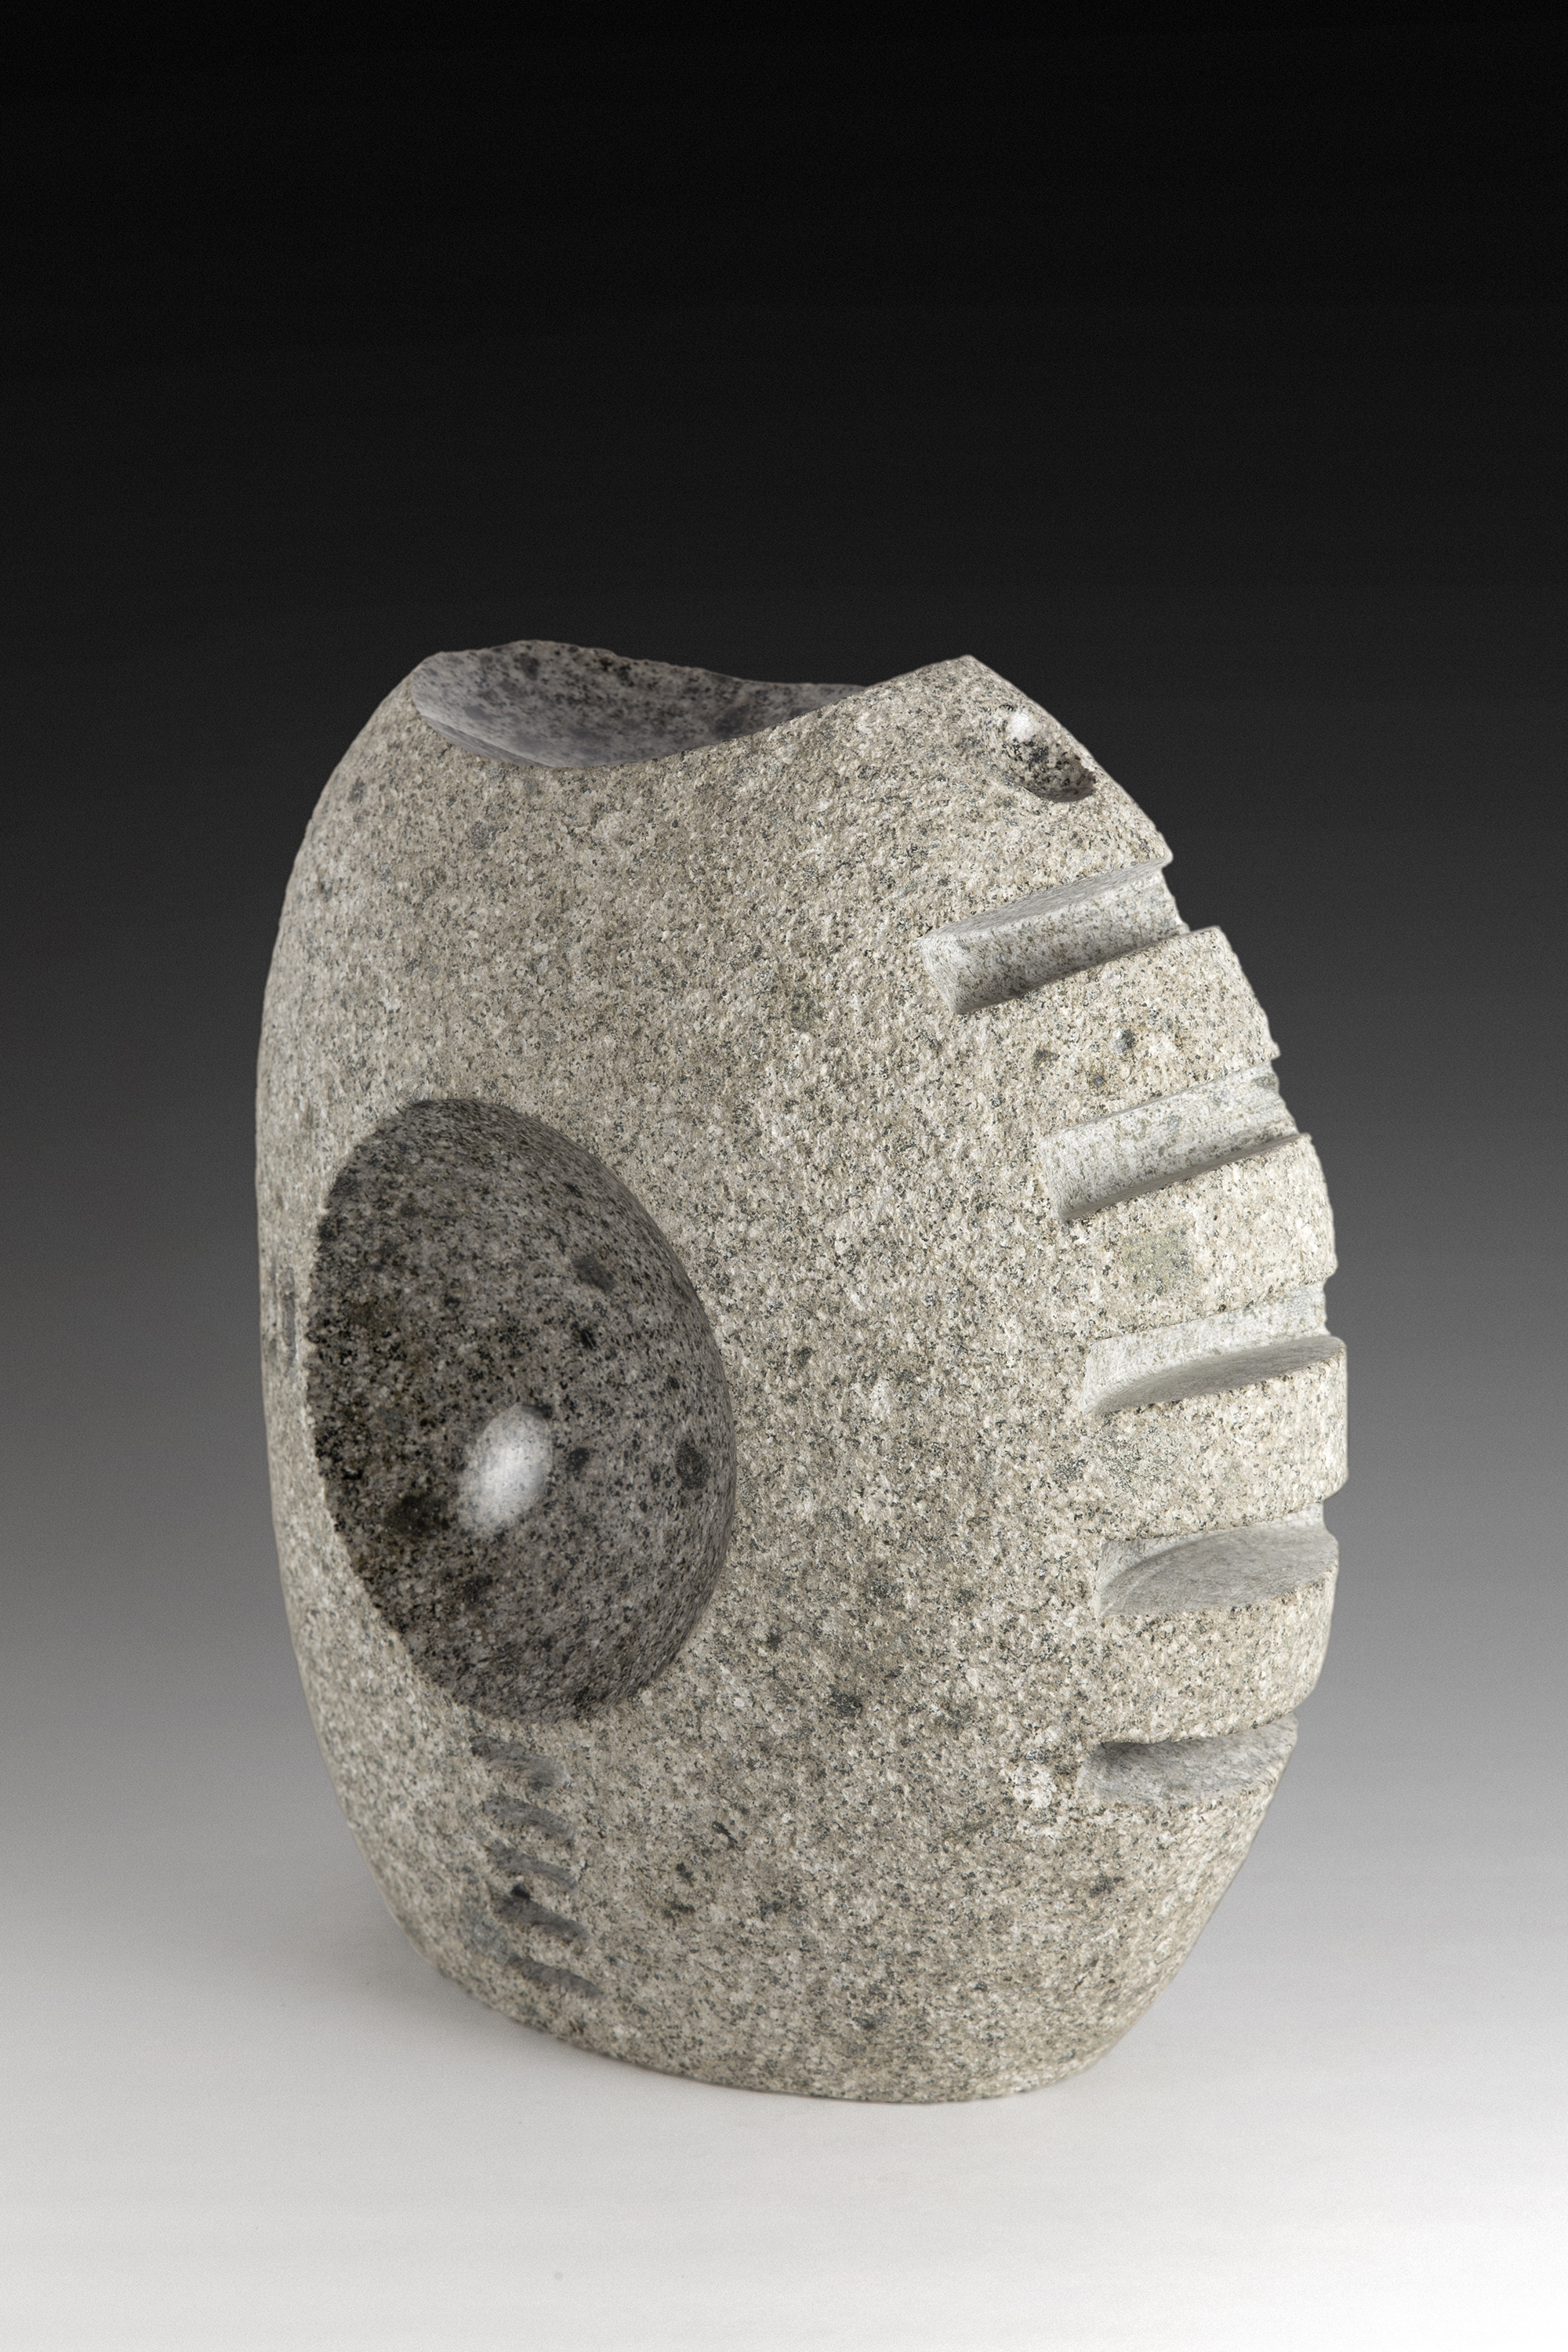 “Rigid”, granite, 13” tall, 2013 I wanted to make something organic, but mechanical. Cog wheel, gear, tracks…that kind of things overlapping with the very organic shape and texture of the river rock intrigued me.